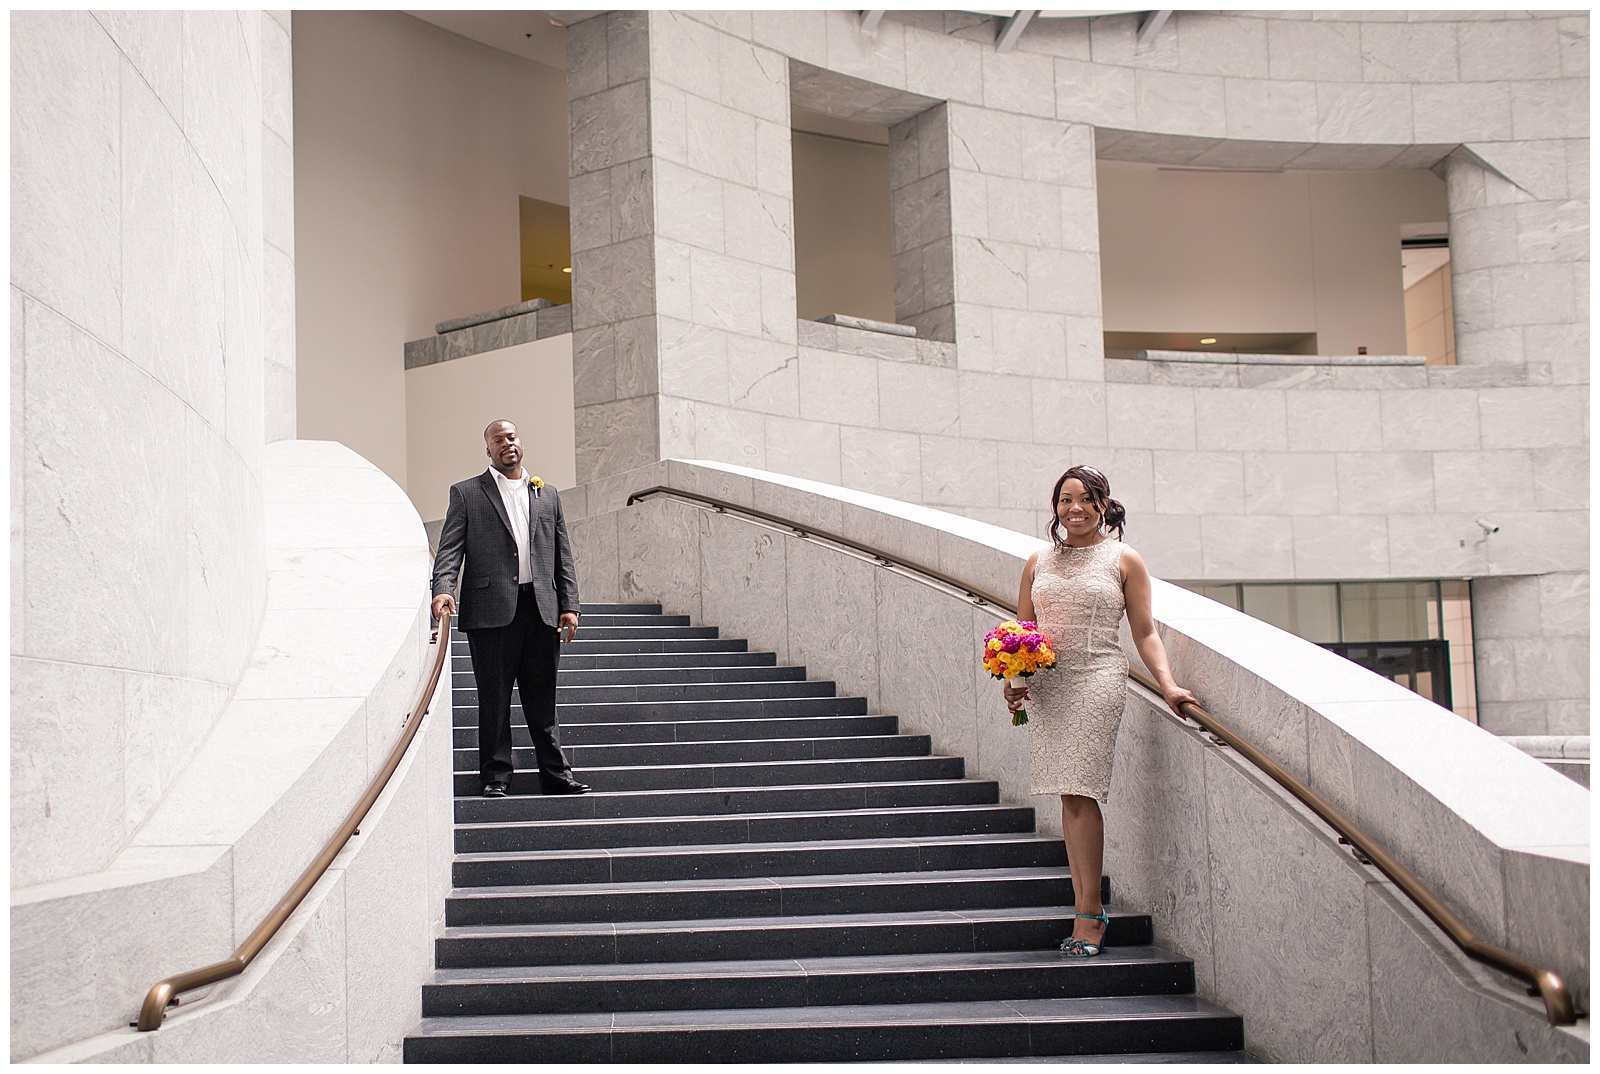 Elopement photography at the Charles Evans Whittaker United States Courthouse in Kansas City.